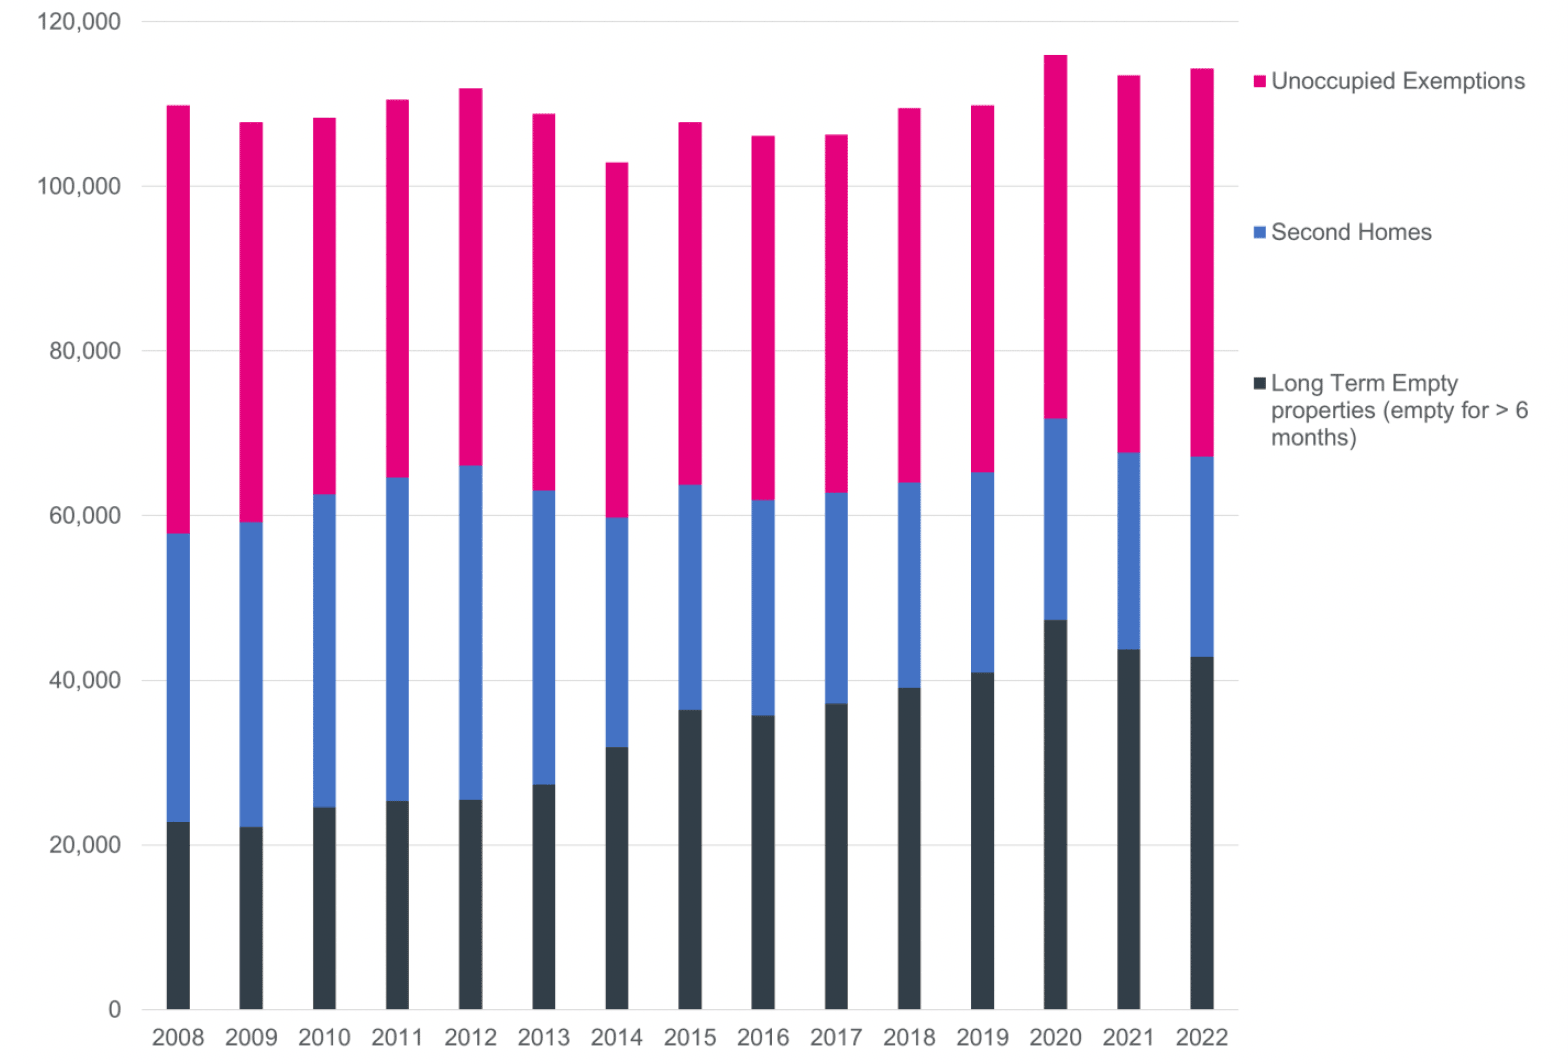 A vertical bar chart showing empty properties in Scotland year to end September, from September 2008 - 2022.